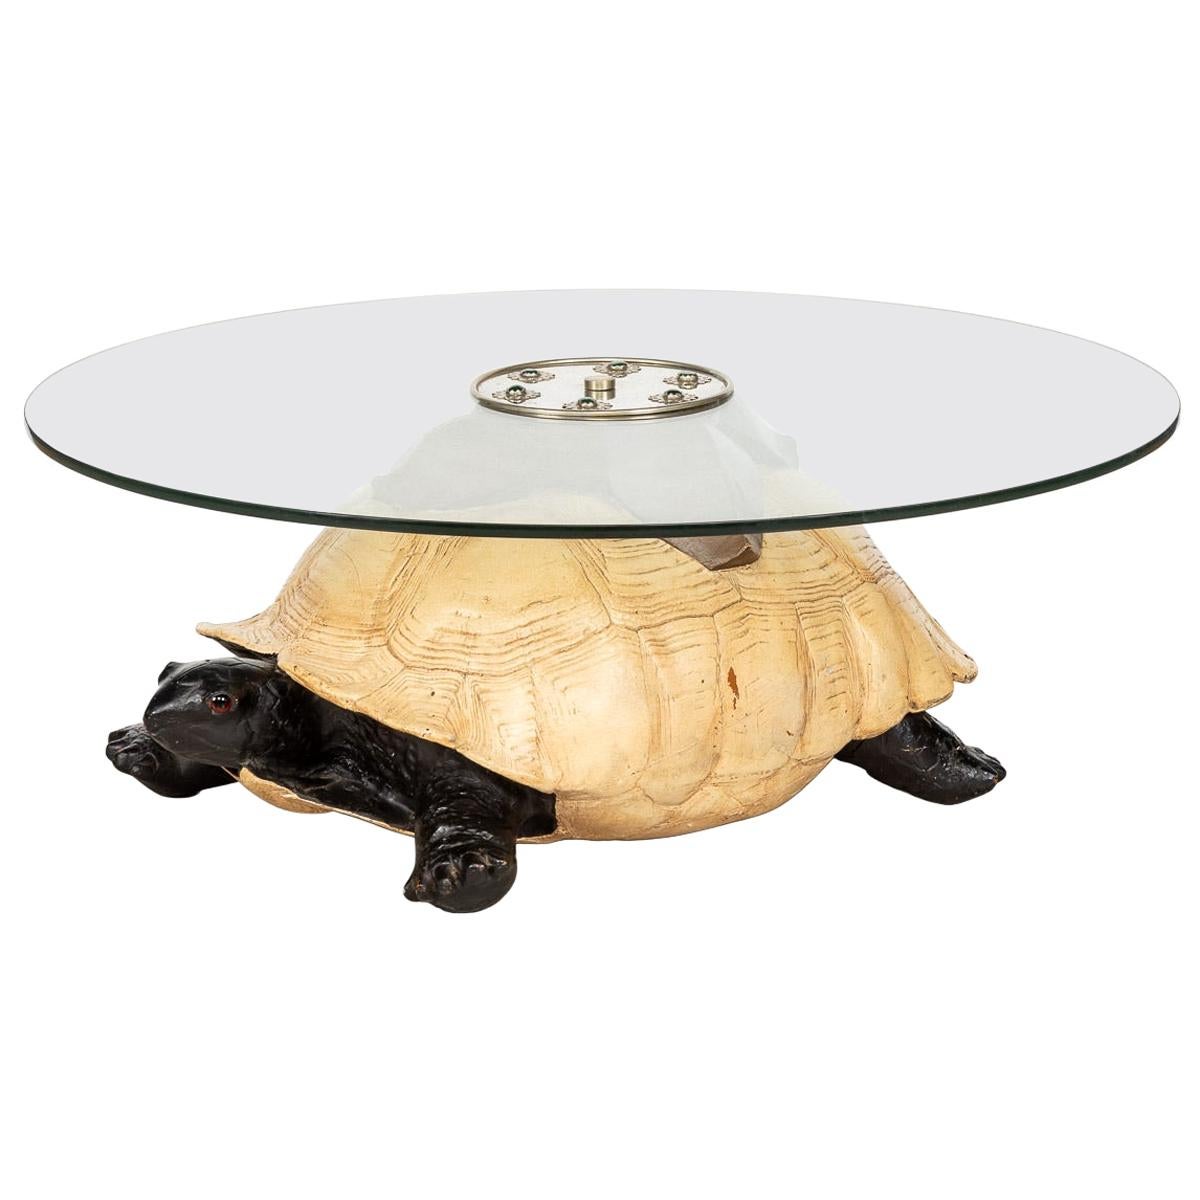 Unusual Coffee Table in the Form of a Turtle by Anthony Redmile, London